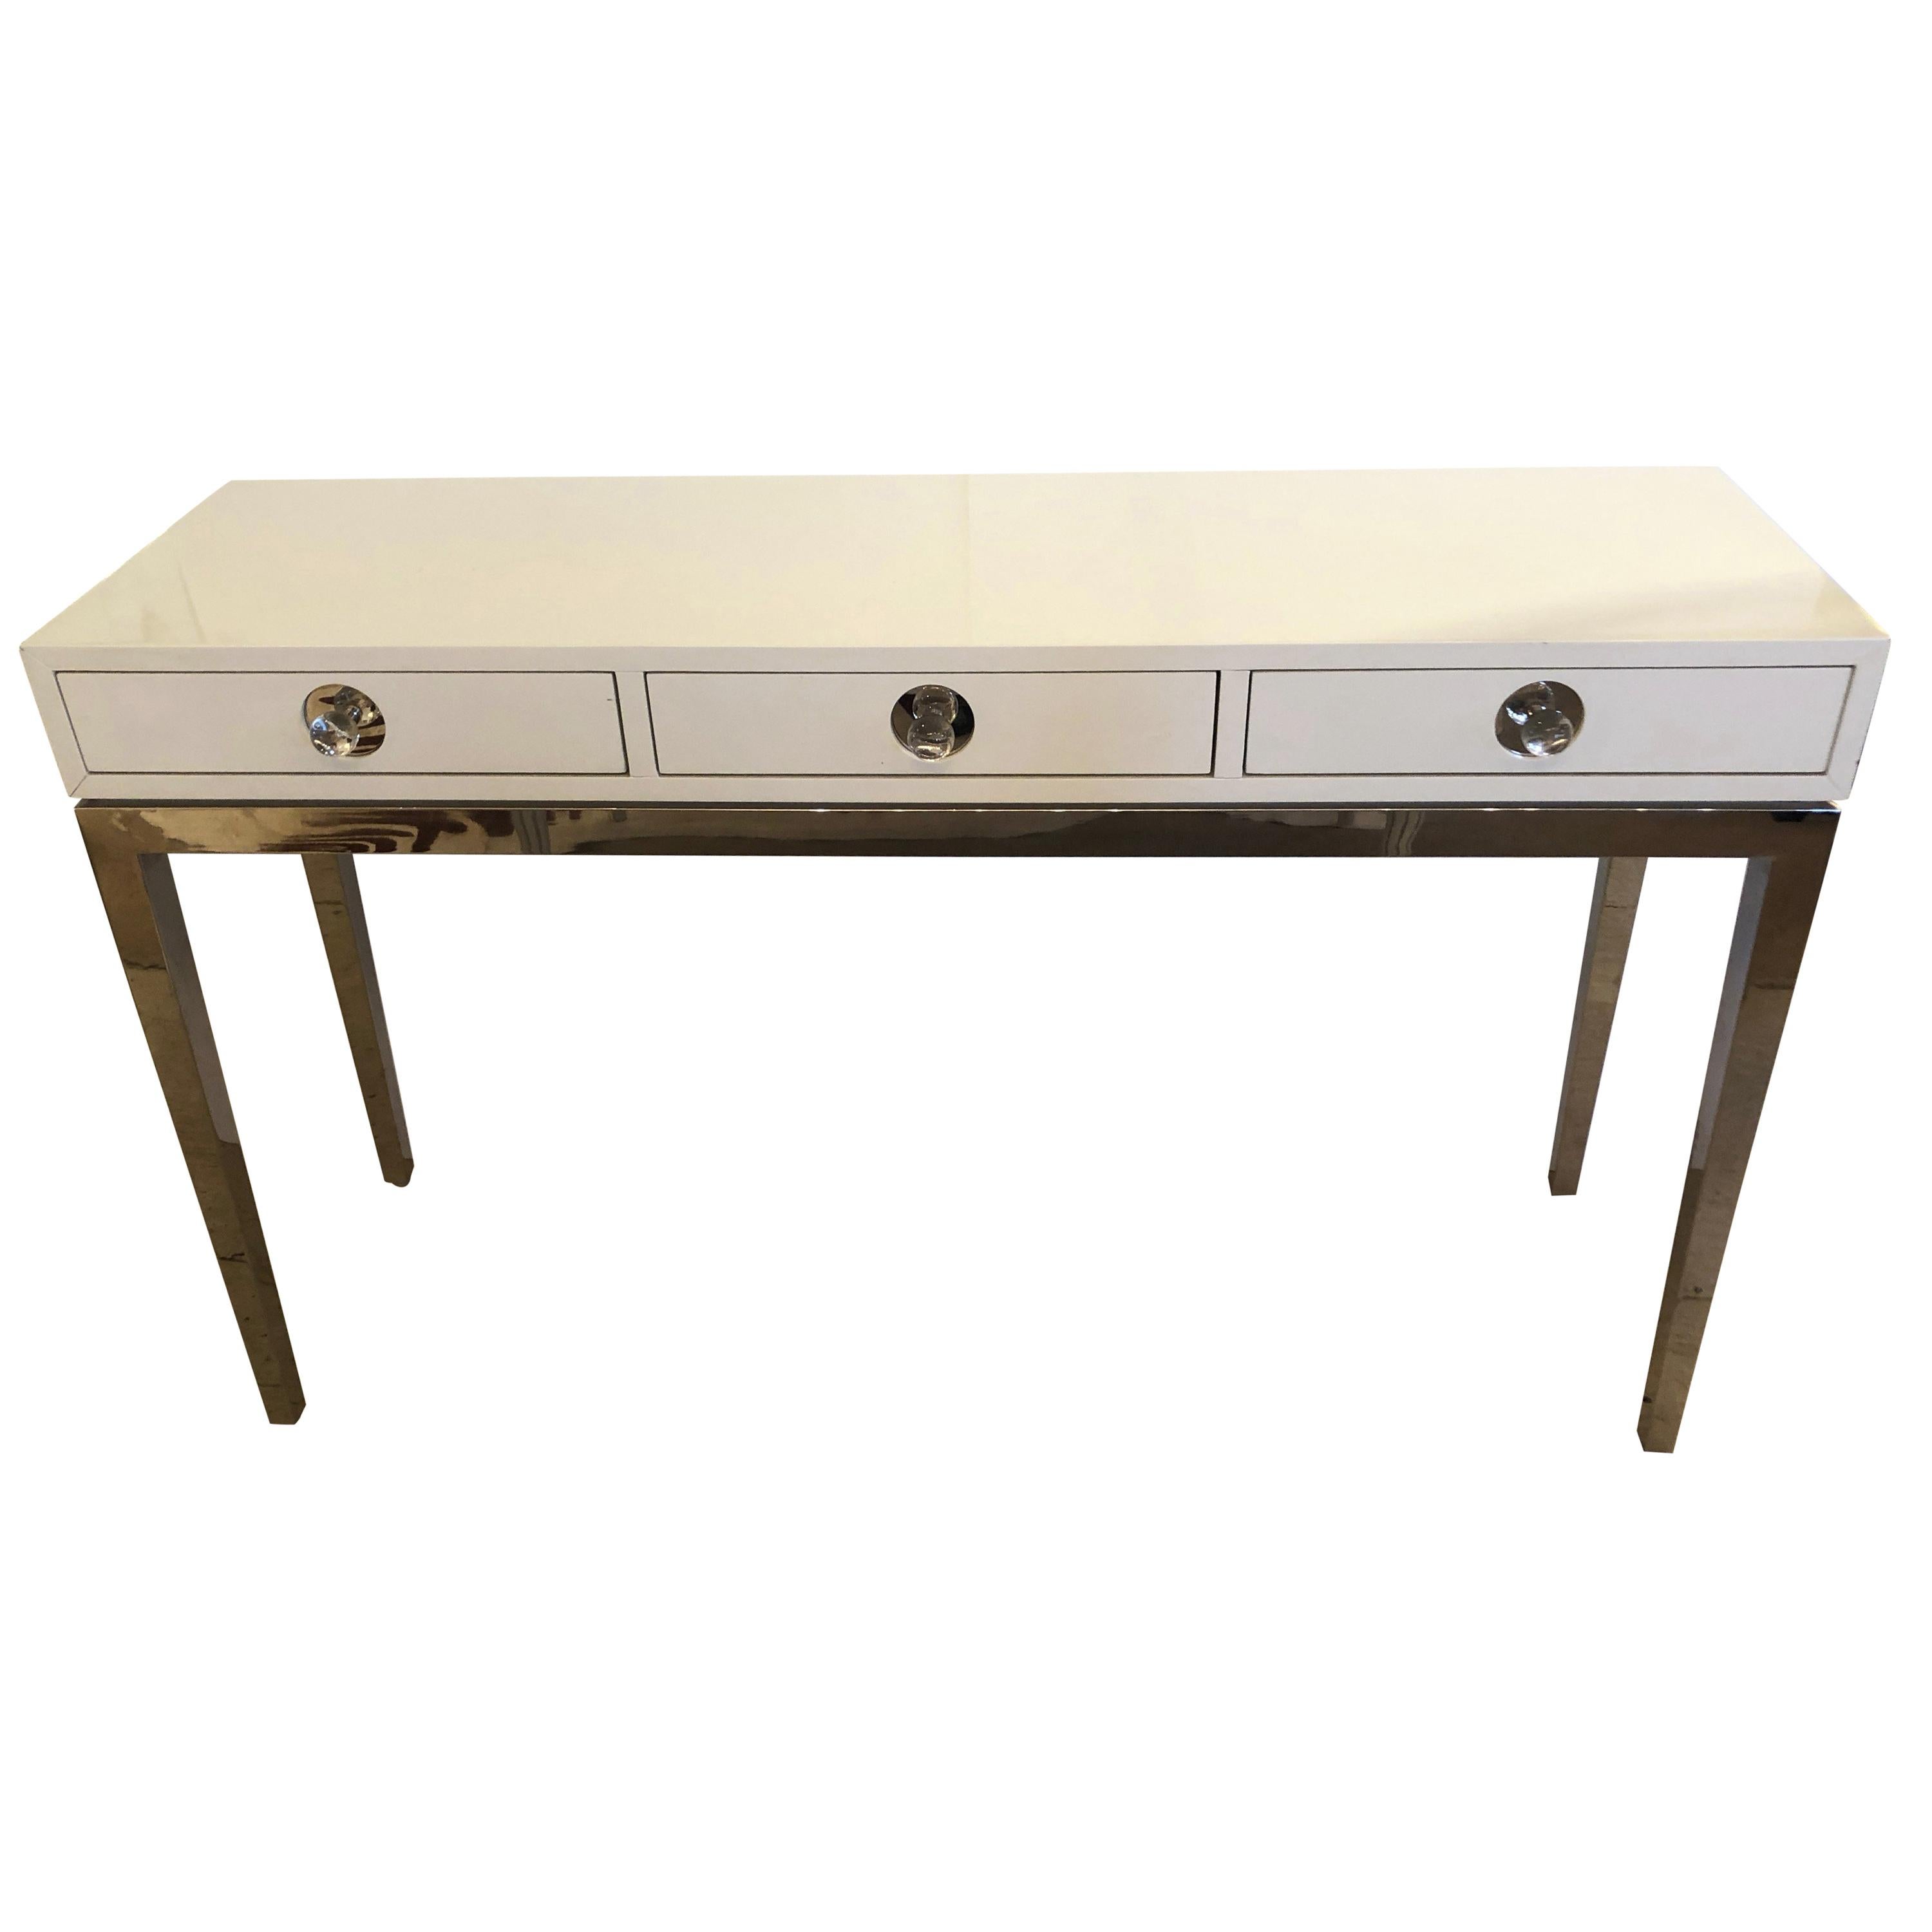 Glitzy Jonathan Adler White Lacquer and Chrome Console with 3 Drawers